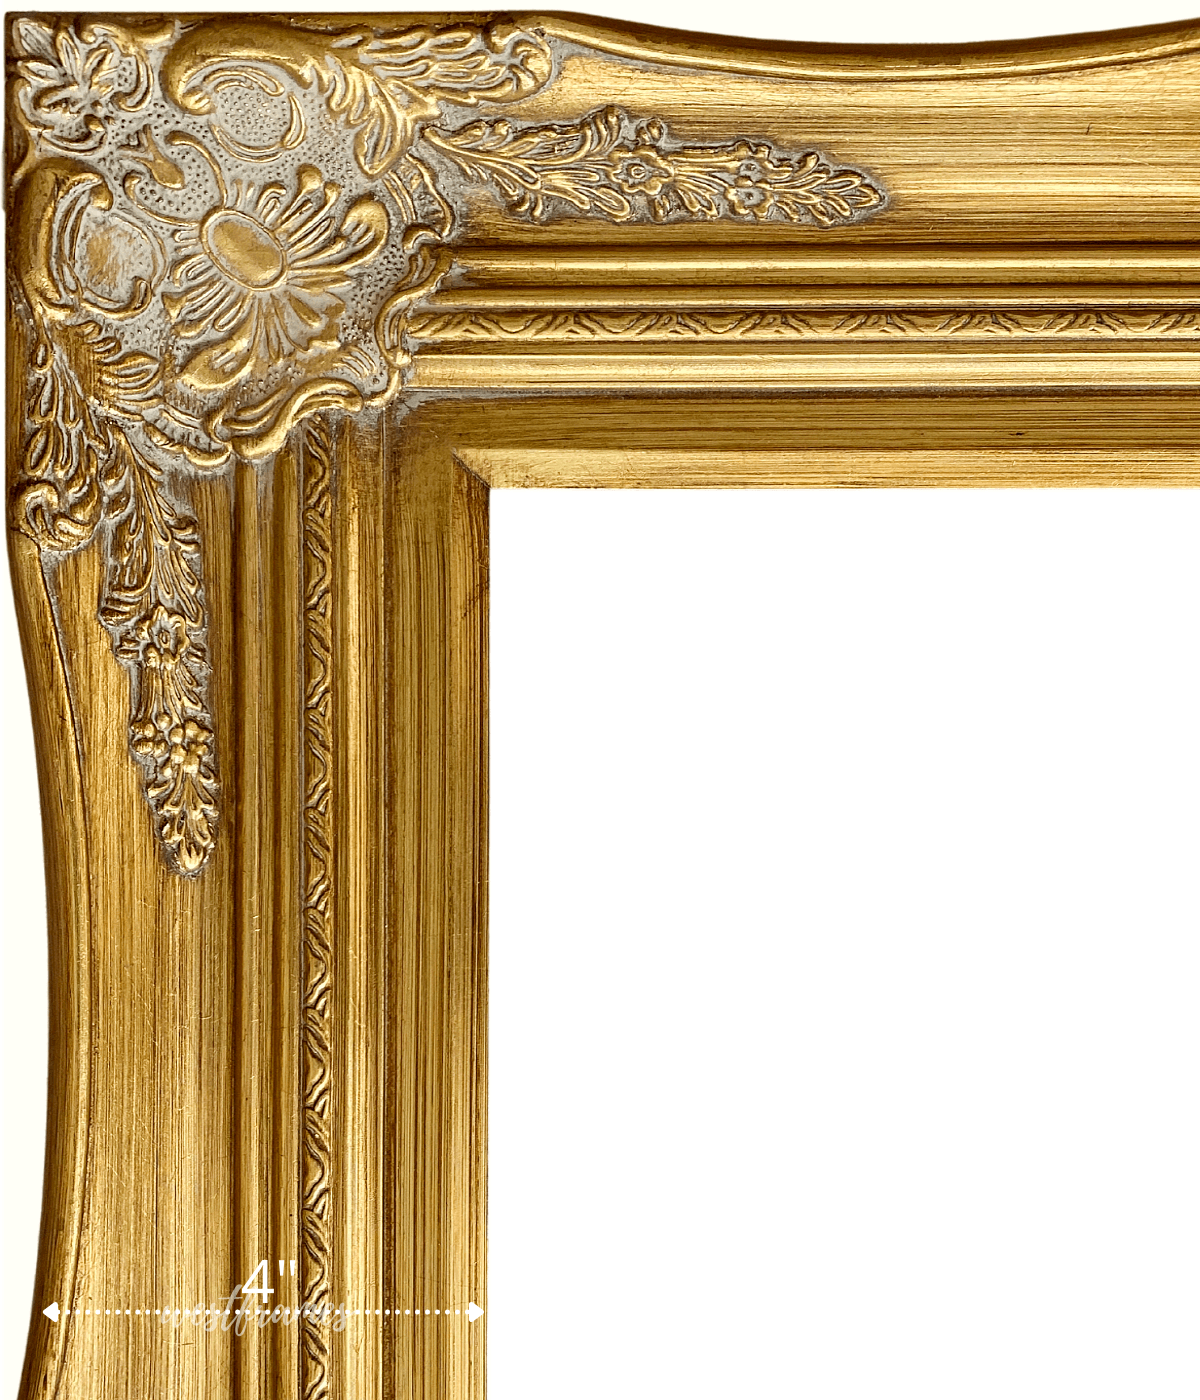 12x16 Vintage Gold Ornate Picture Frame, Decorative Baroque Wall